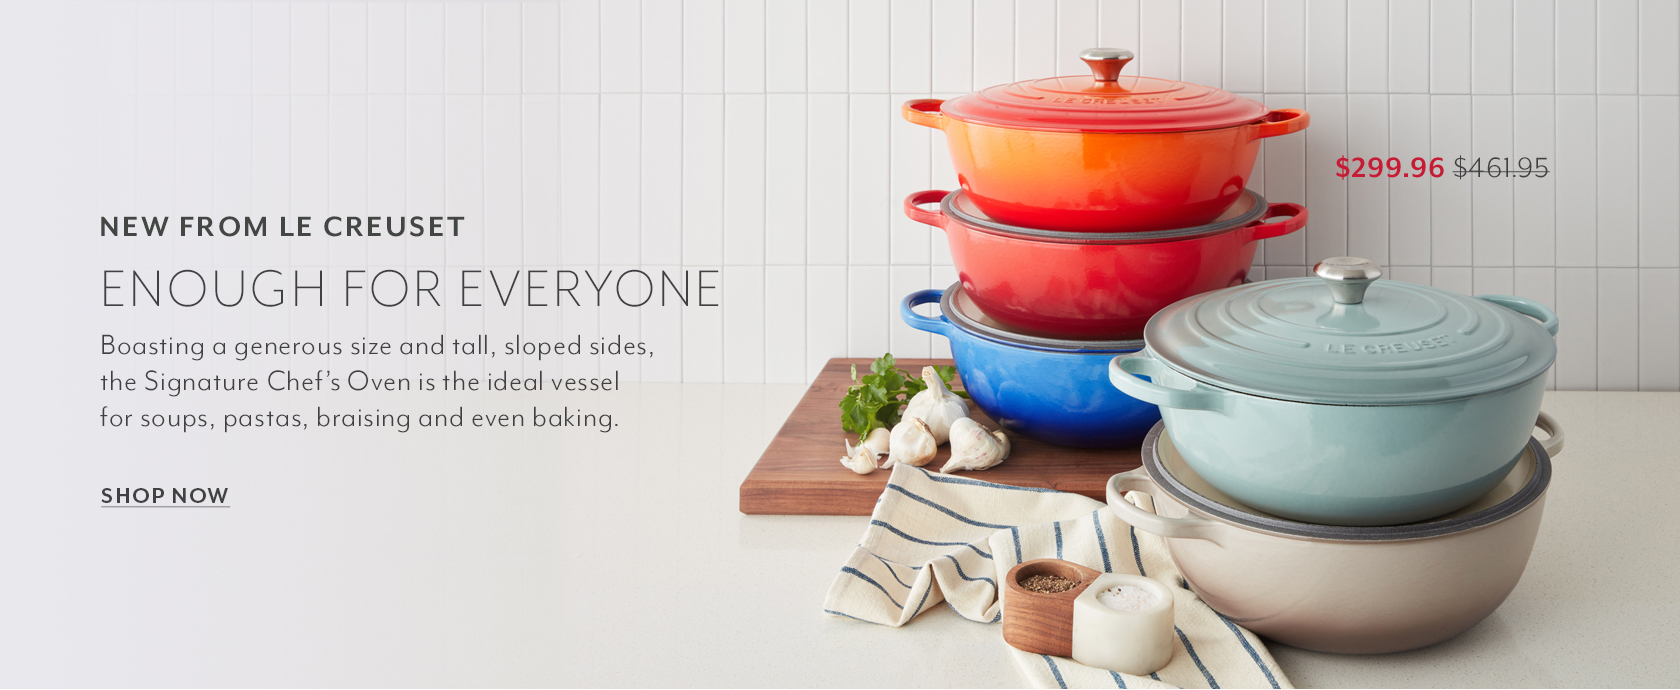 New from Le Creuset enough for everyone. Boasting a generous size and tall, sloped sides, the Signature Chef's Oven is the ideal vessel for soups, pastas, braising and even baking. $299.96. Shop now.